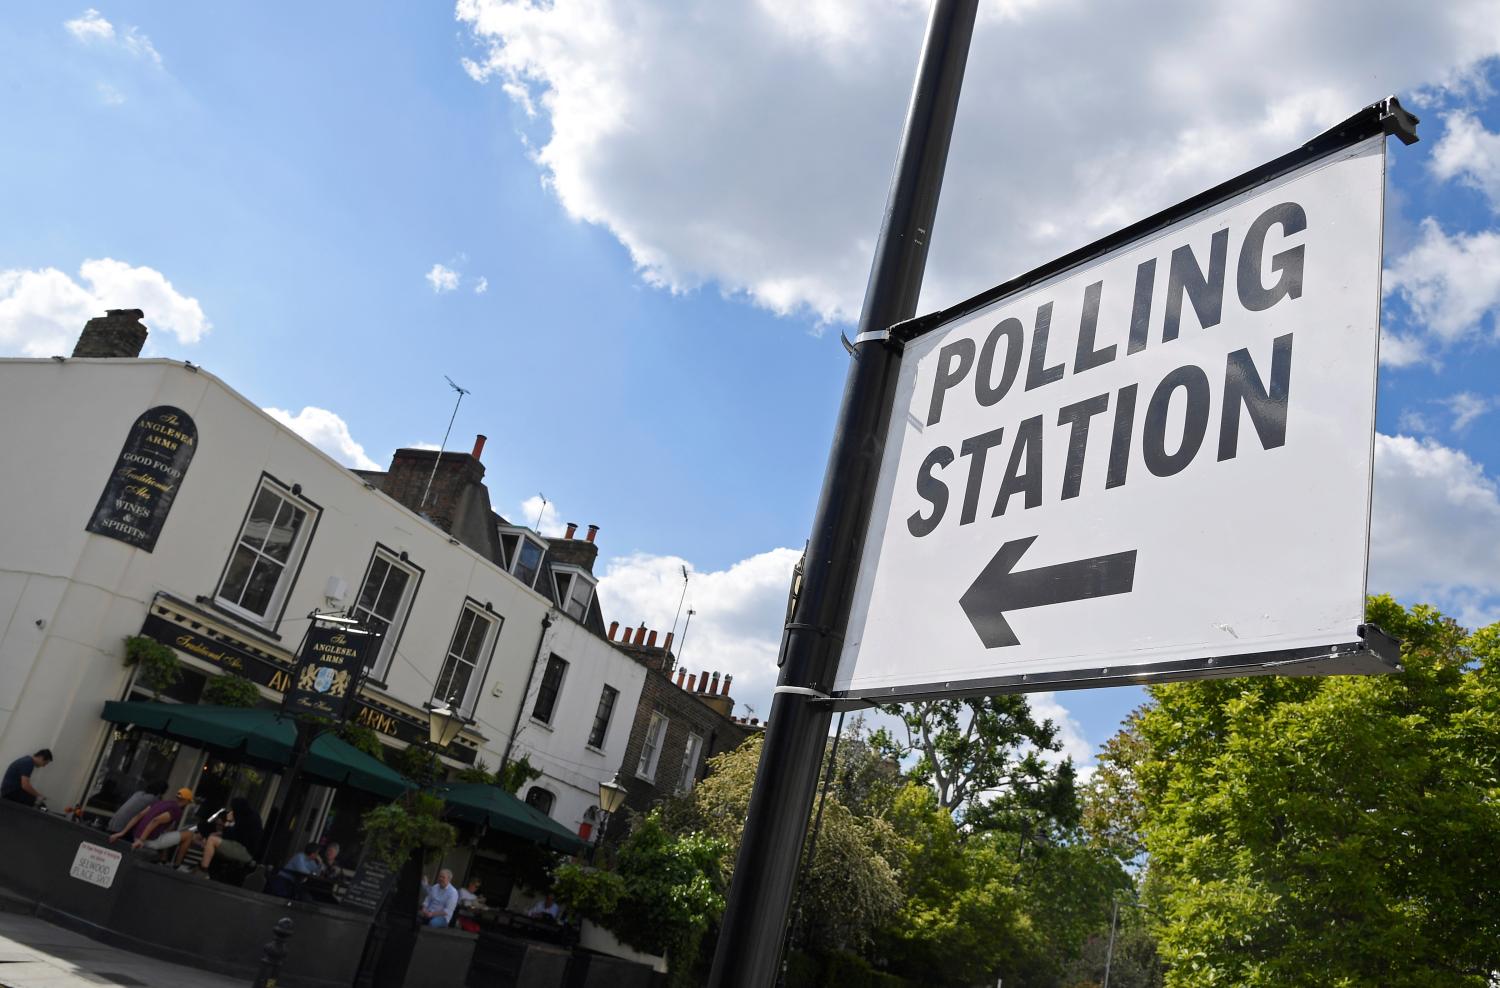 A sign is seen placed on a lamppost next to a pub being used as a polling station for the forthcoming EU elections, in London, Britain, May 21, 2019. REUTERS/Toby Melville - RC1E483EF870